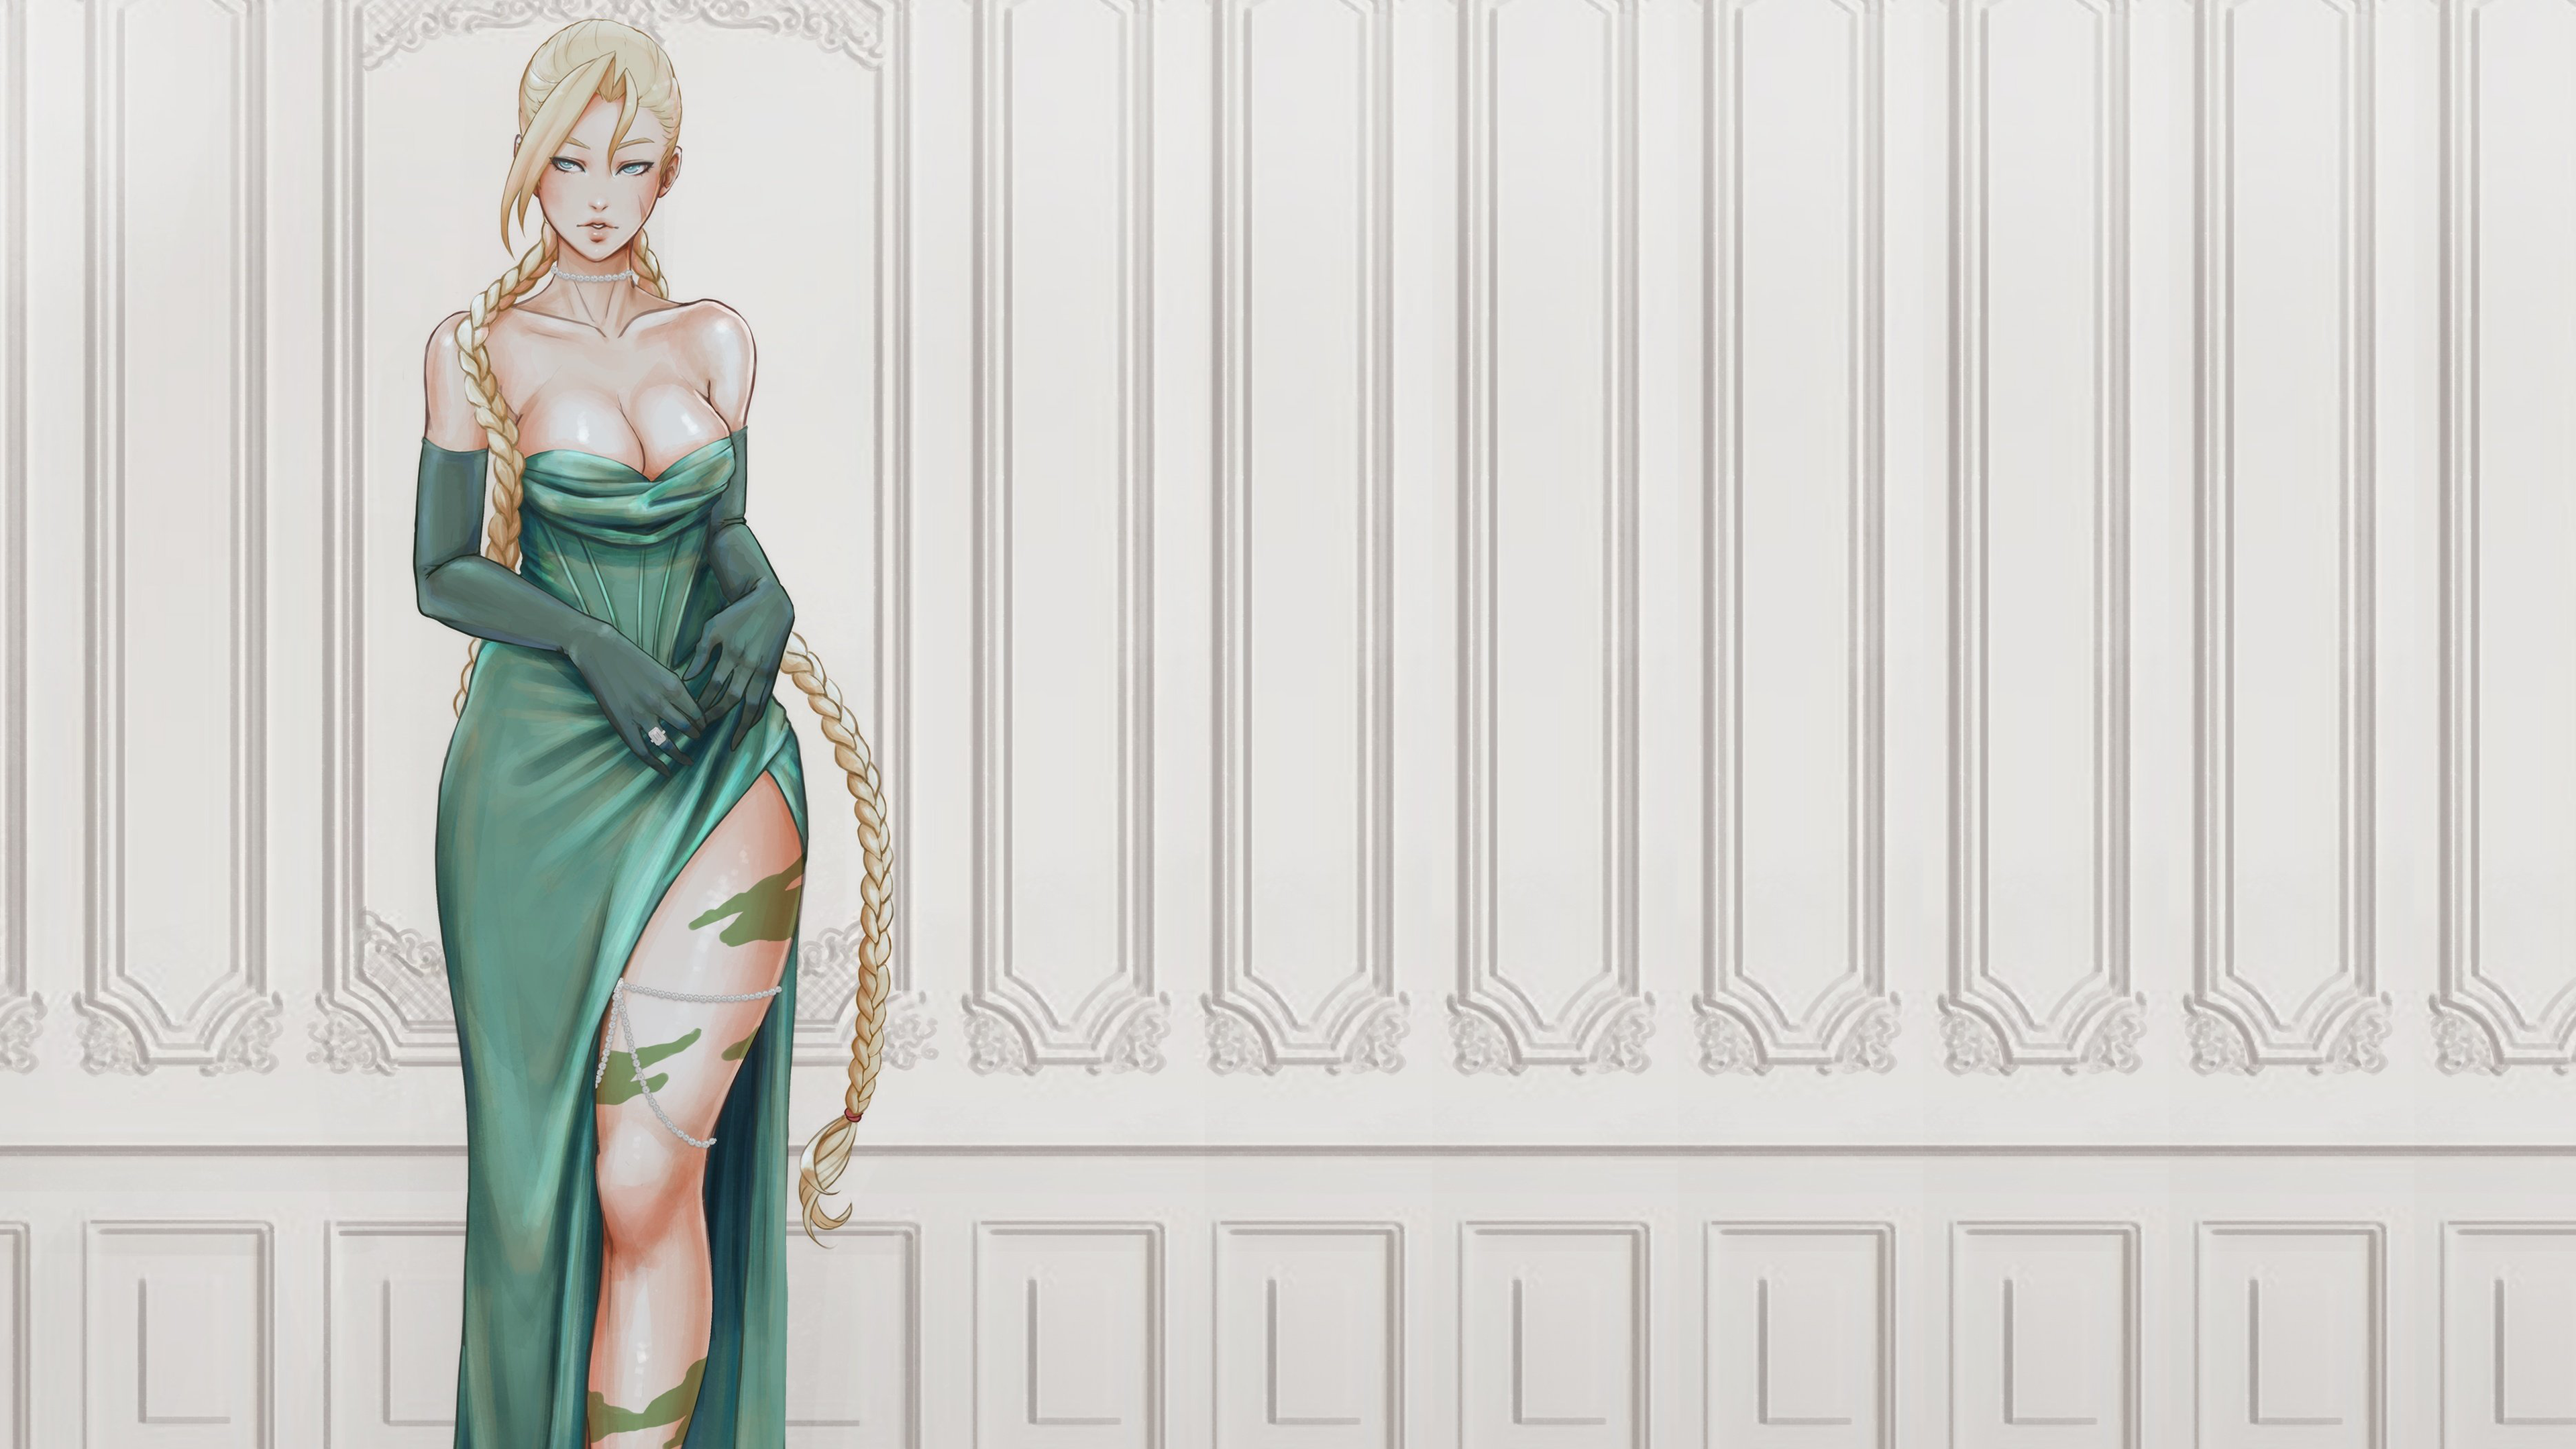 Anime 3840x2160 video games video game girls Capcom Street Fighter Super Street Fighter II Cammy White dress green dress boobs big boobs cleavage elbow gloves thighs braids blonde blue eyes necklace pearl necklace bangs anime girls bare shoulders strapless dress rings jewelry fighting games